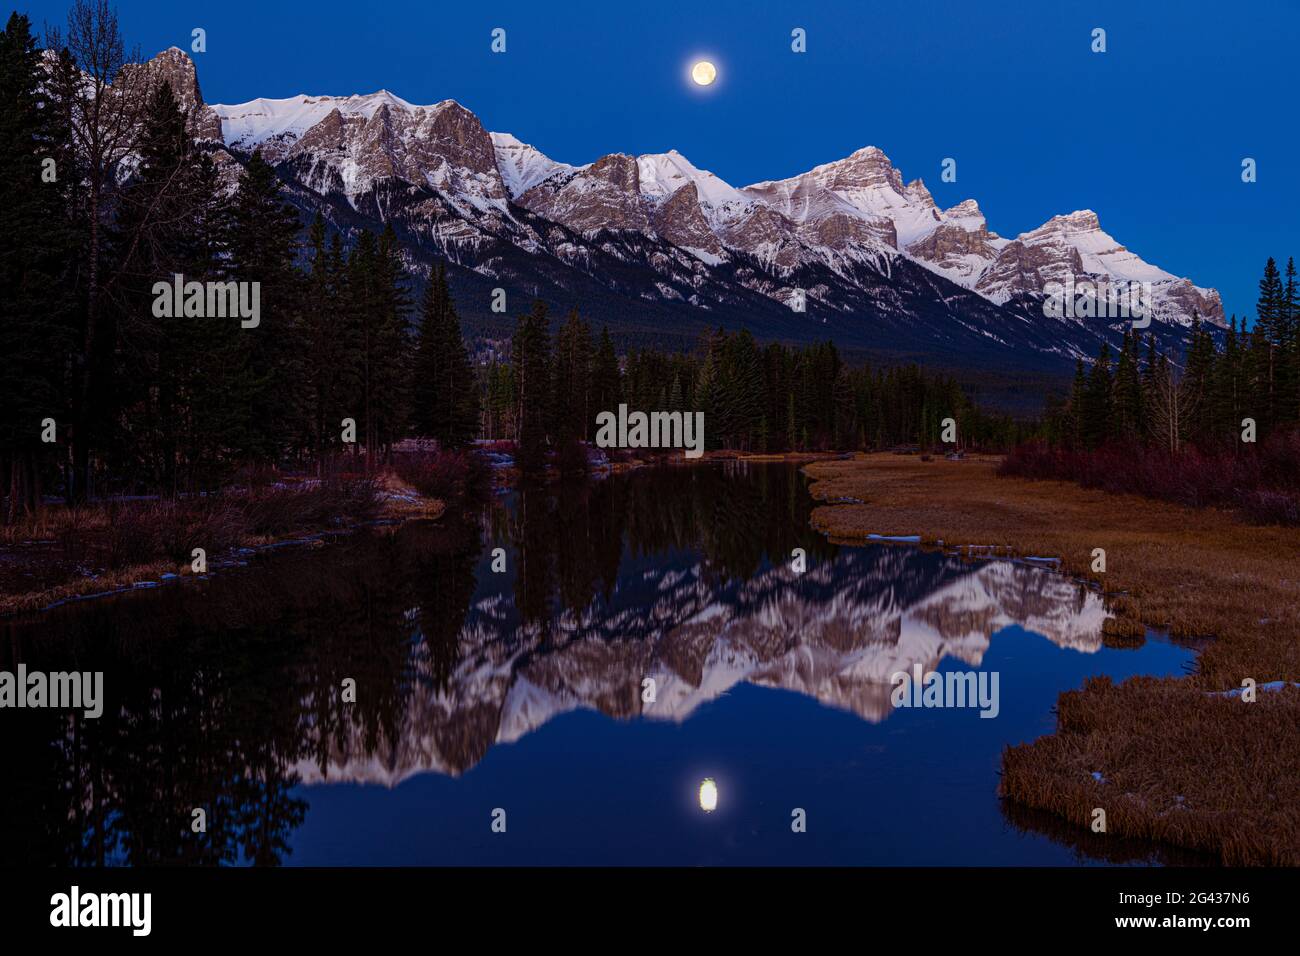 Landscape with mountains and Policeman Creek, Canmore, Alberta, Canada Stock Photo